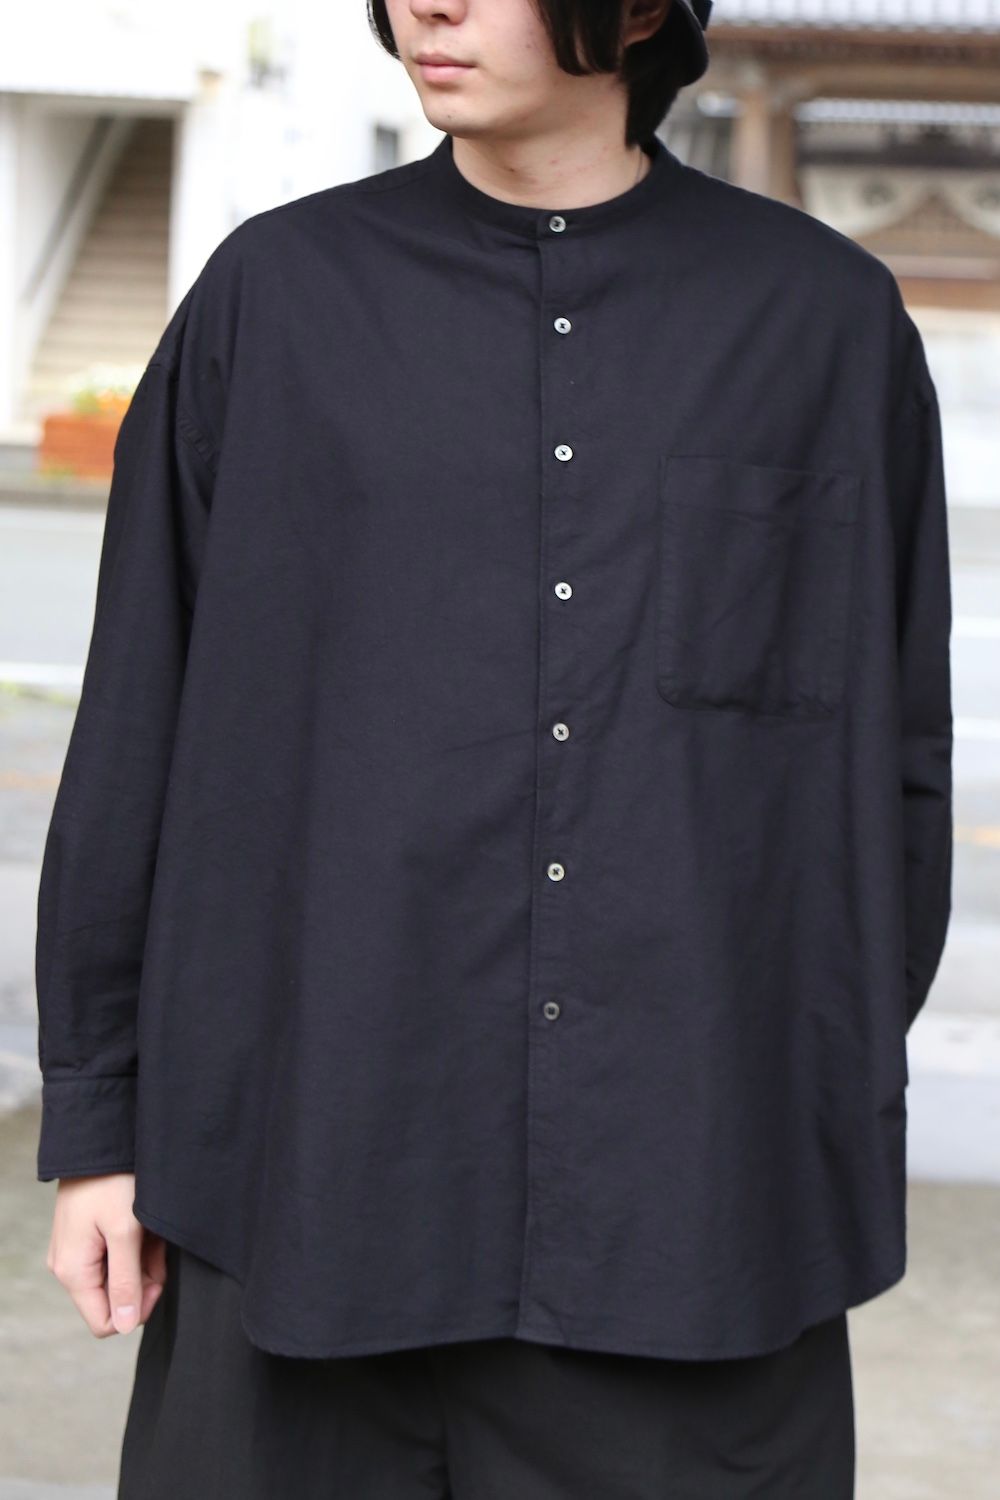 Graphpaper Oxford Oversized Band Collar Shirt style.2021.3.20